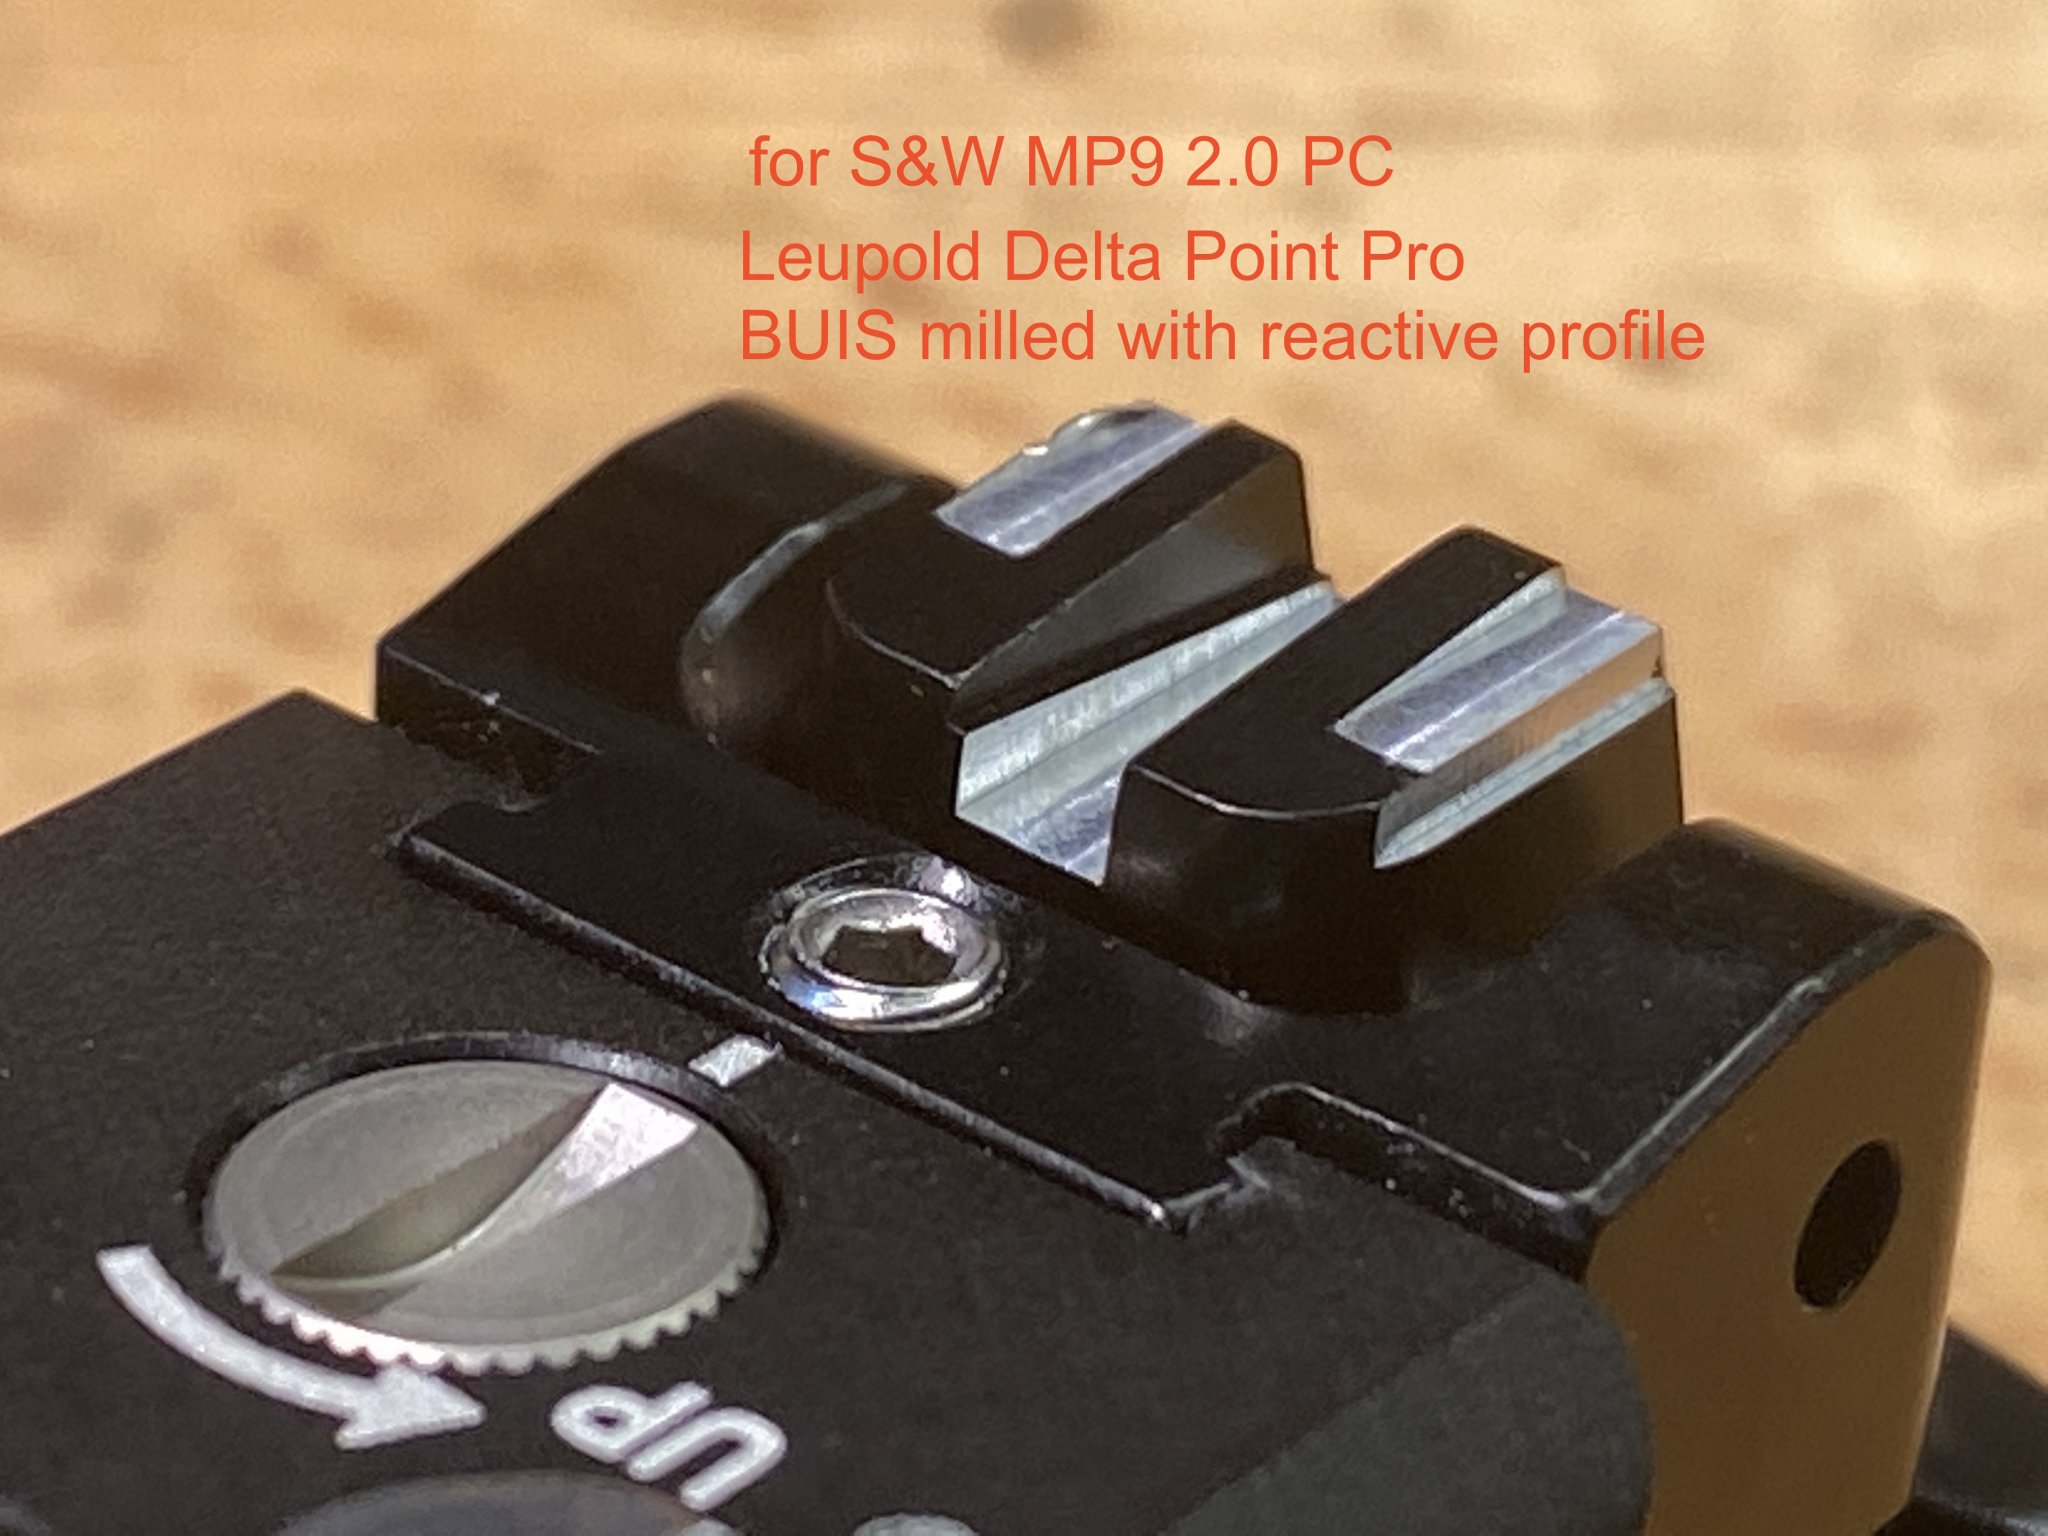 Smith & Wesson M&P 2.0 PC Leupold DP Pro Rear Sight Milled  10.25.20IMG_6757 copy.jpg